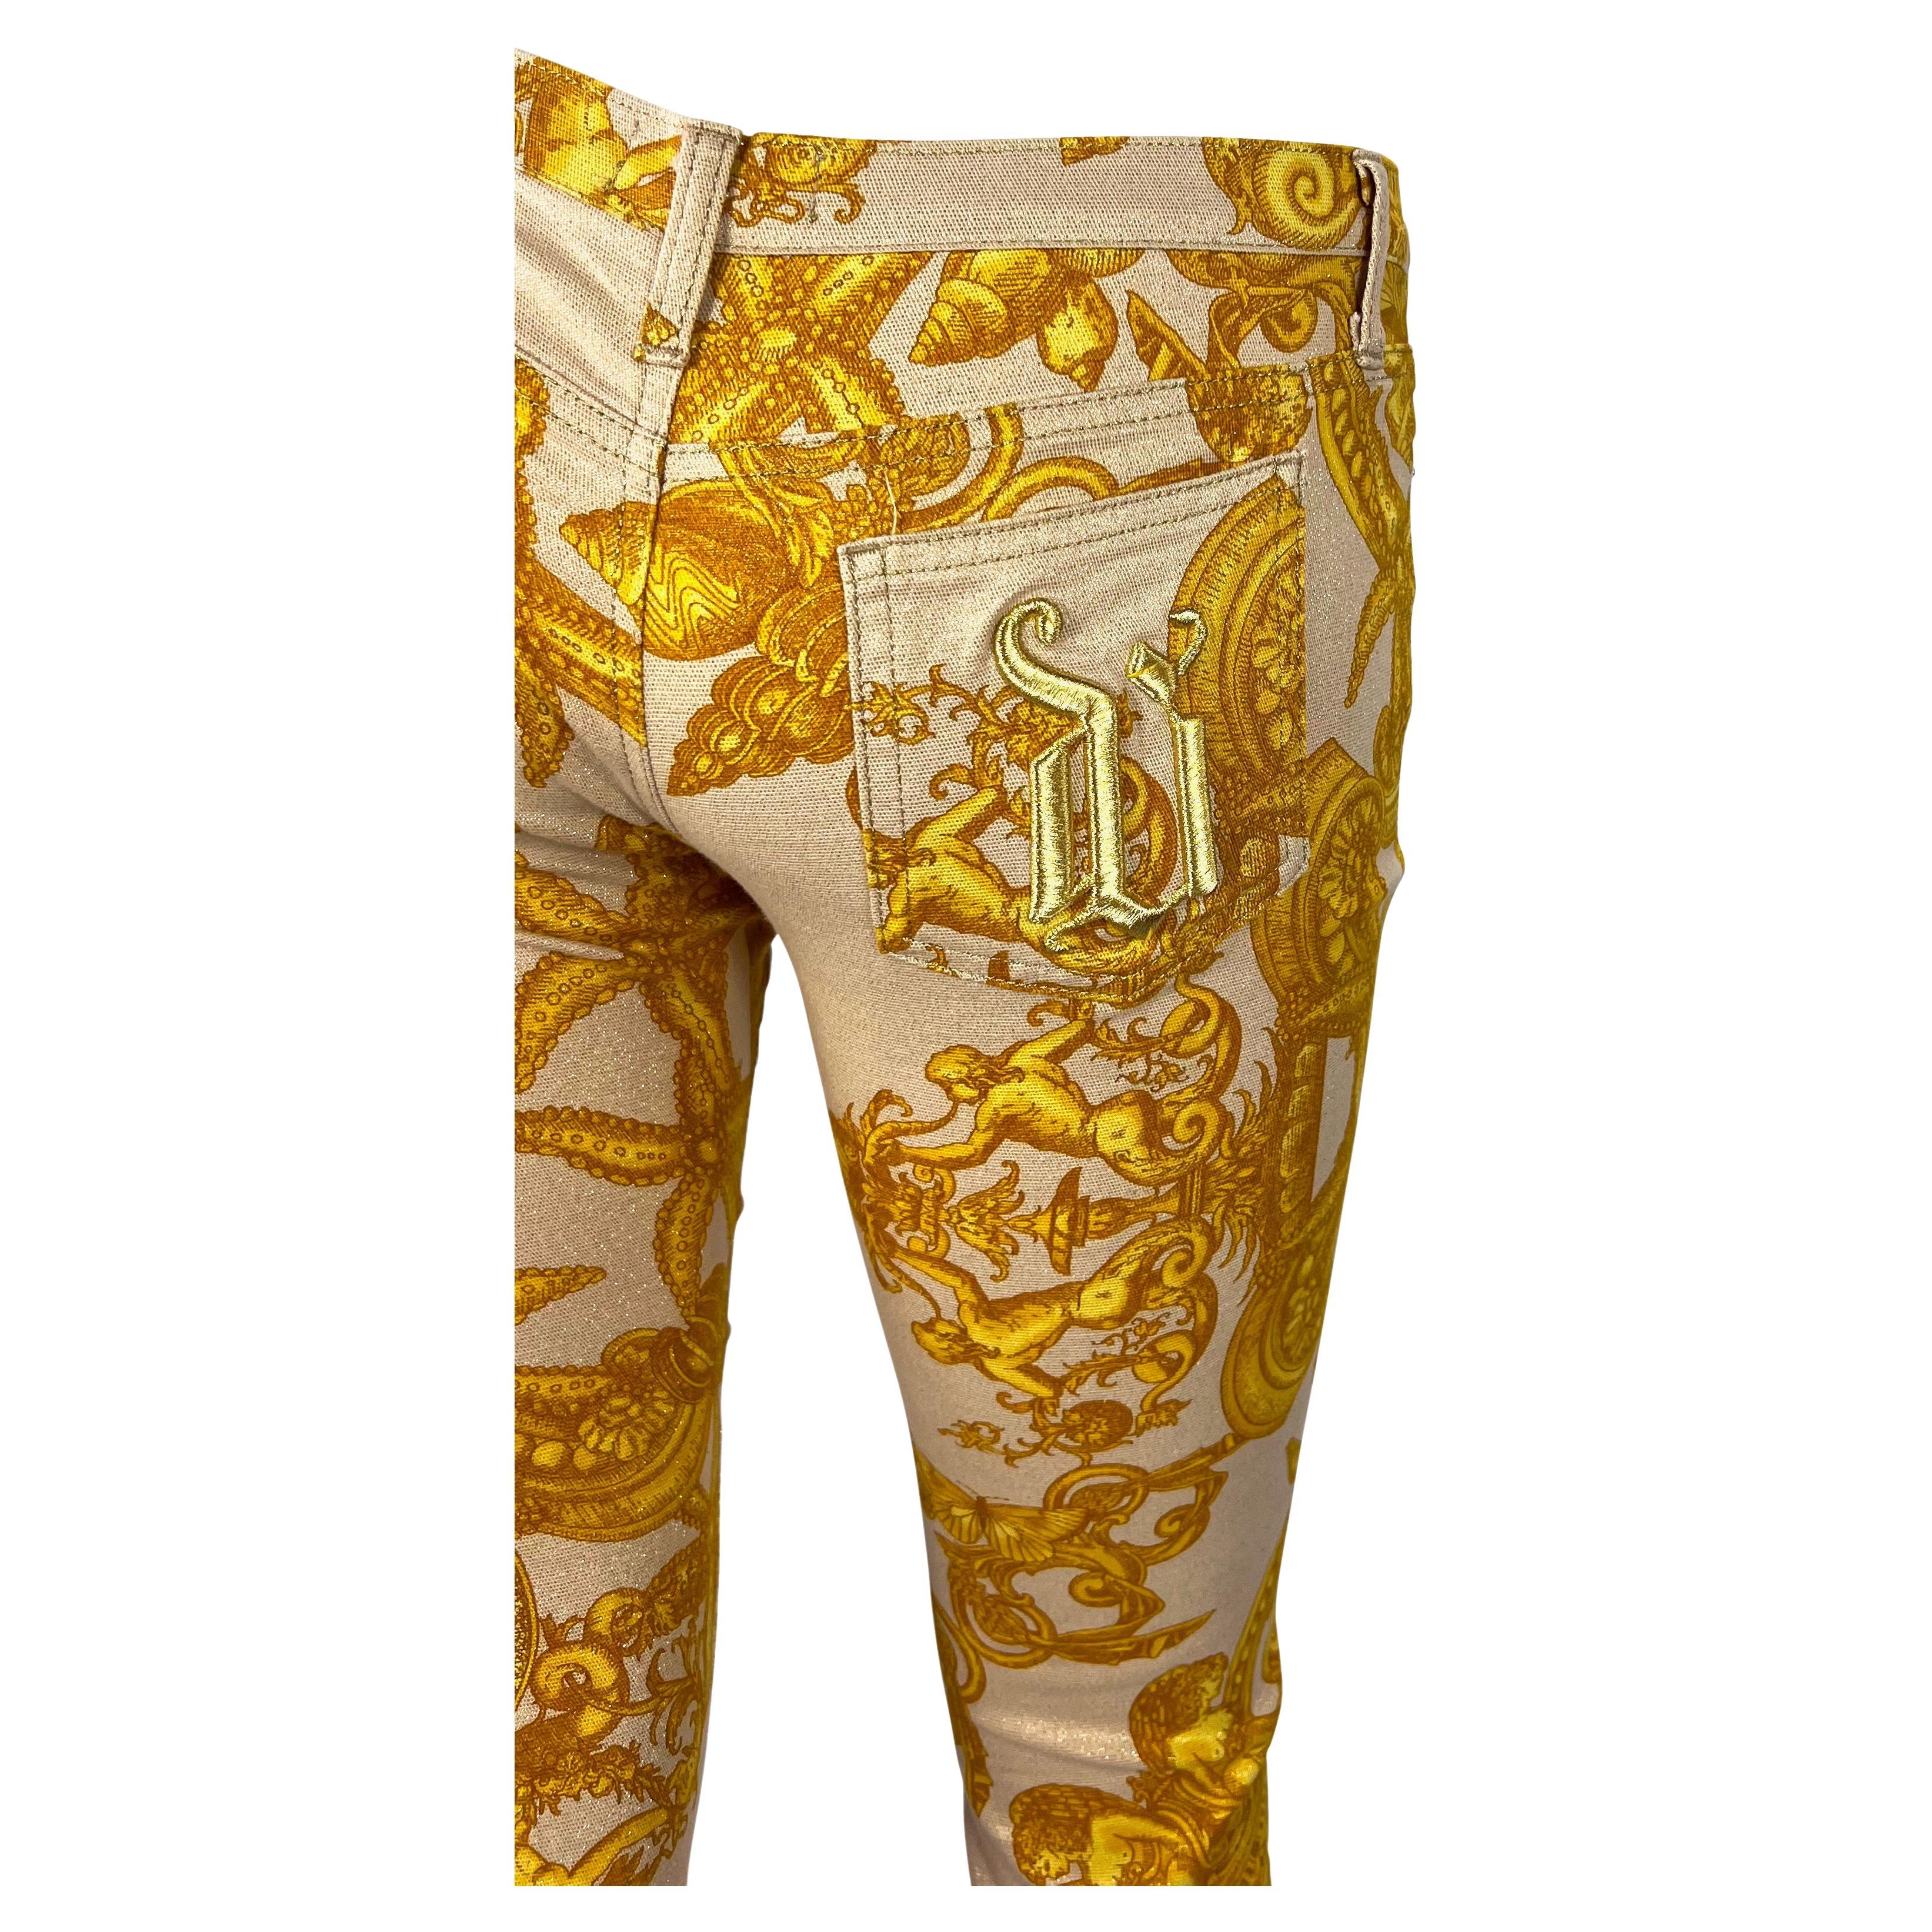 Presenting a pair of low-rise pink and gold Versace jeans, designed by Donatella Versace. From the Spring/Summer 2005 collection, these pants feature a lively gold marine-themed baroque print atop a light pink background. The jeans are made complete